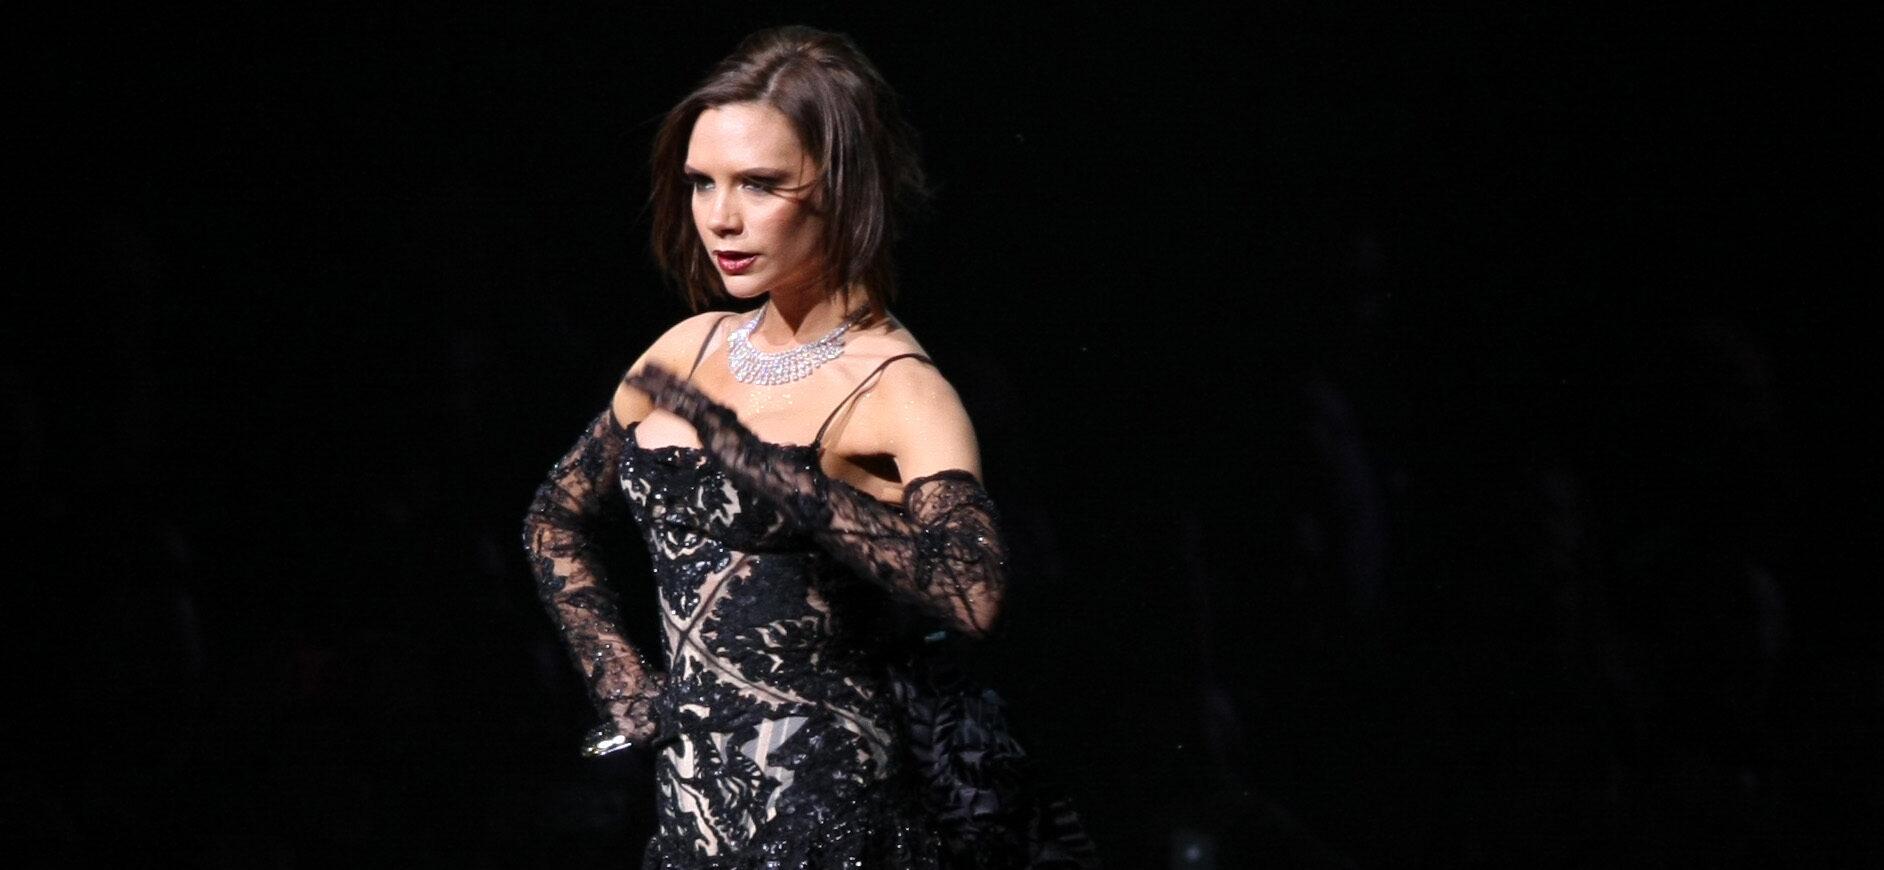 Victoria Beckham Reuniting With Spice Girls For One Night Only!